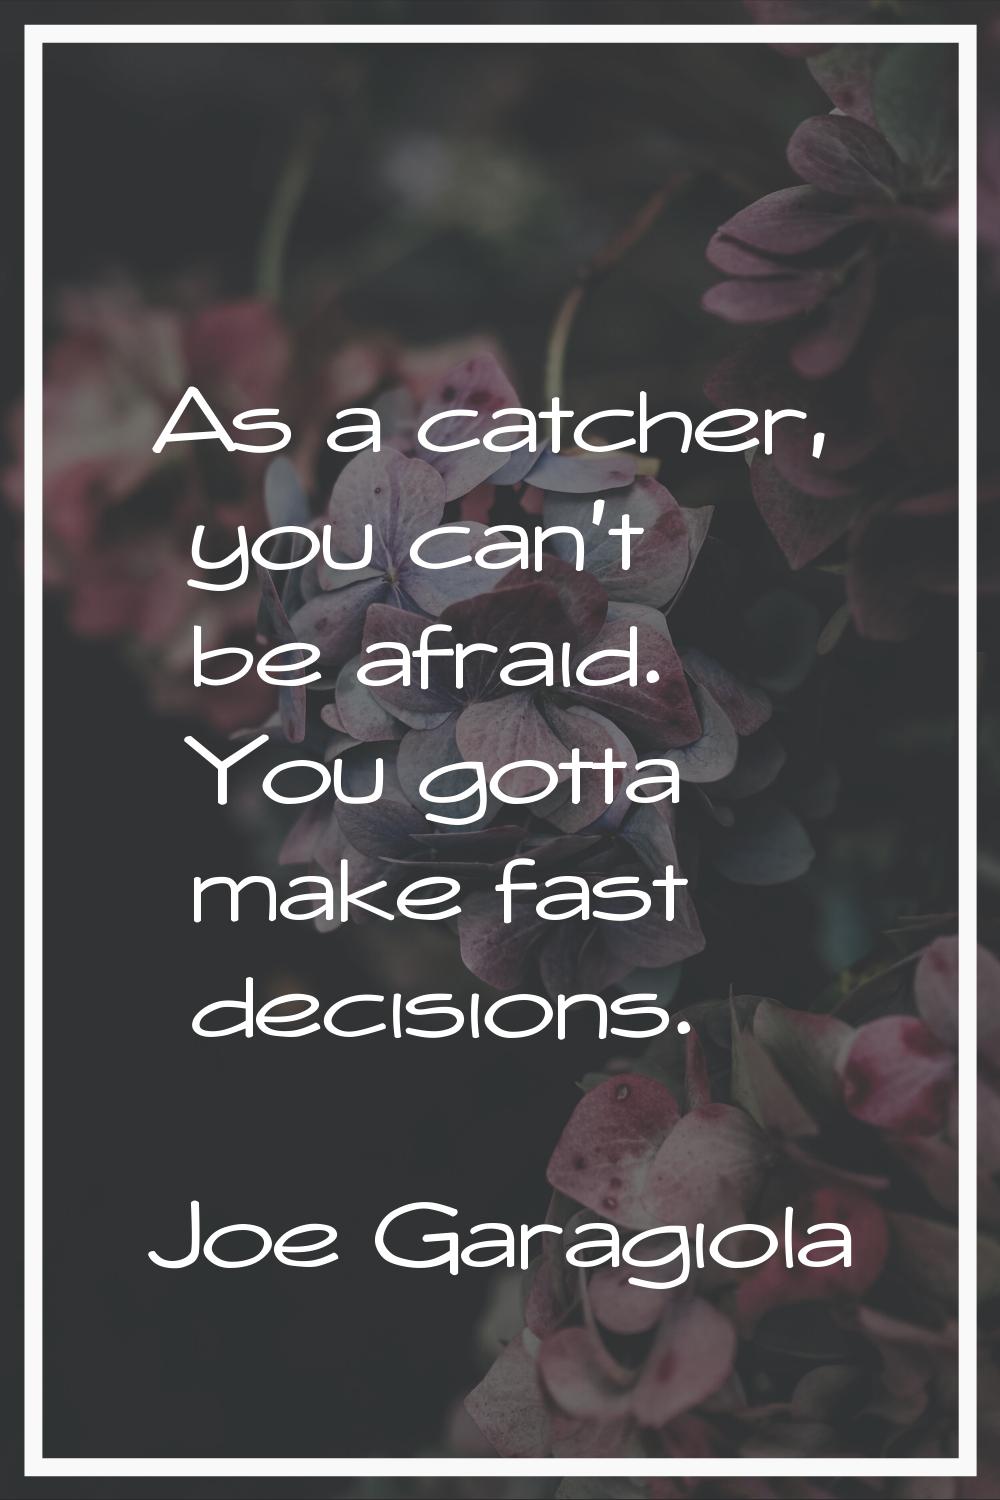 As a catcher, you can't be afraid. You gotta make fast decisions.